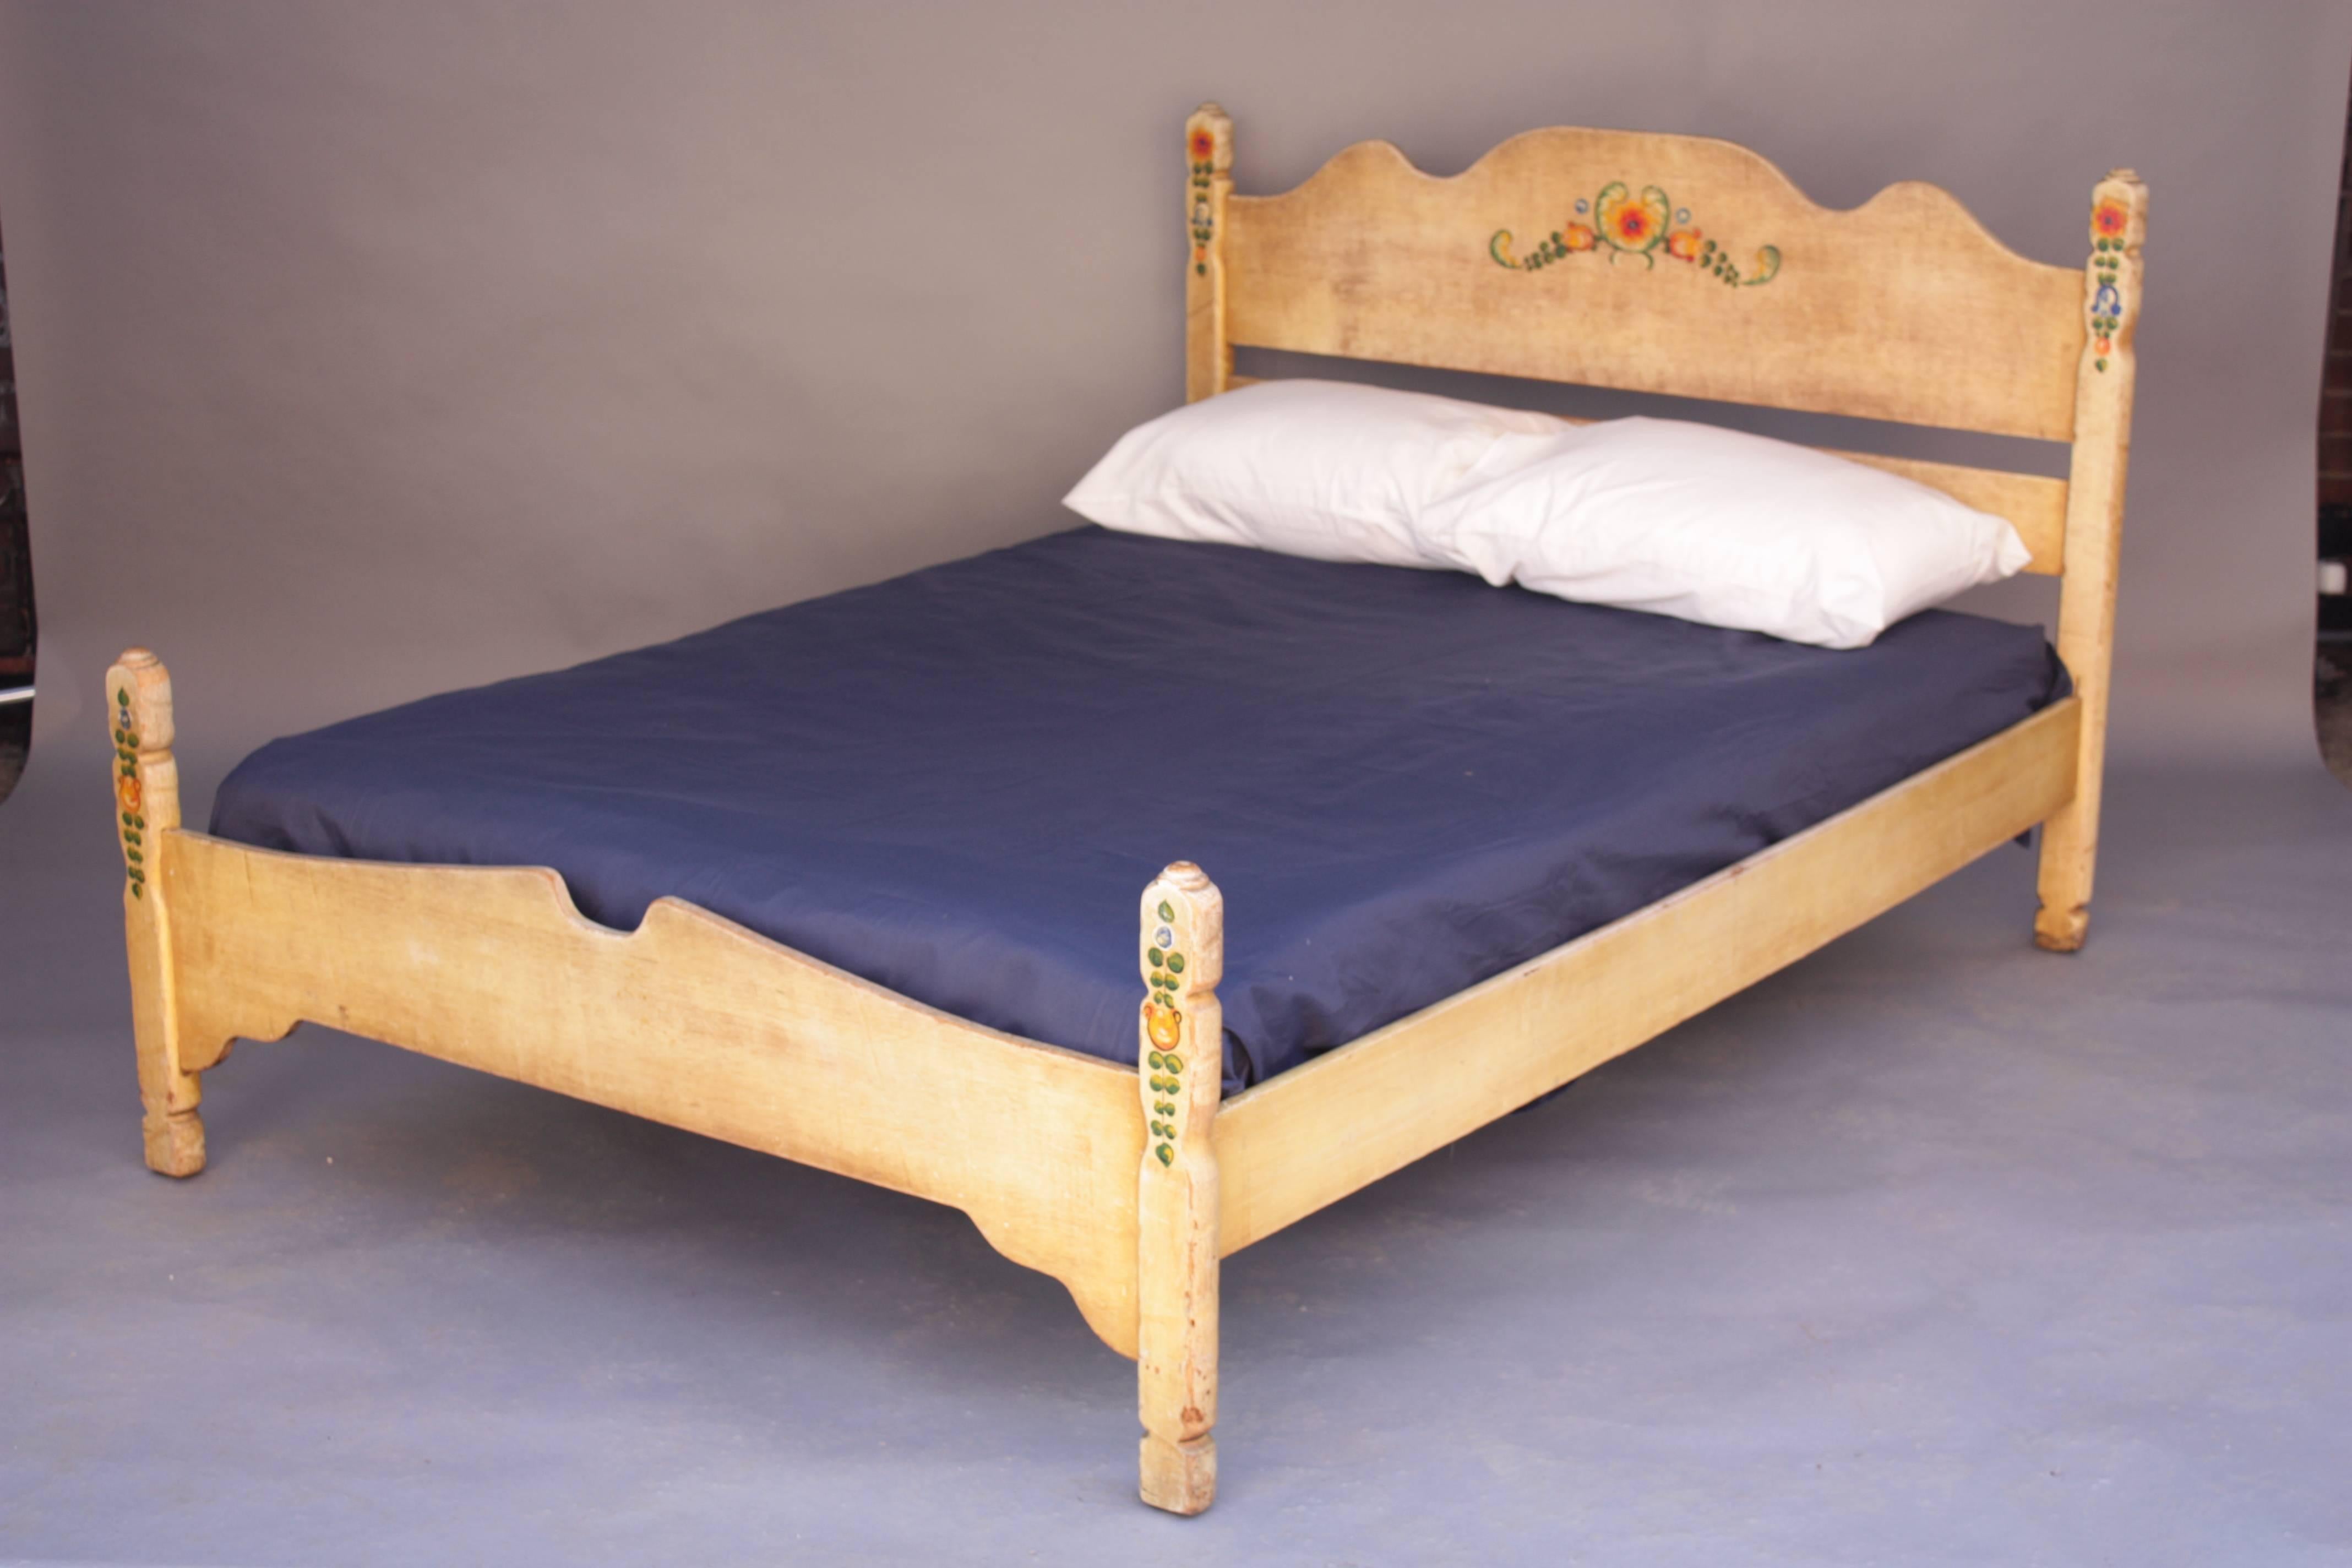 Circa 1930's double bed manufactured by Barker Bros signed Monterey. Hand applied decorations.